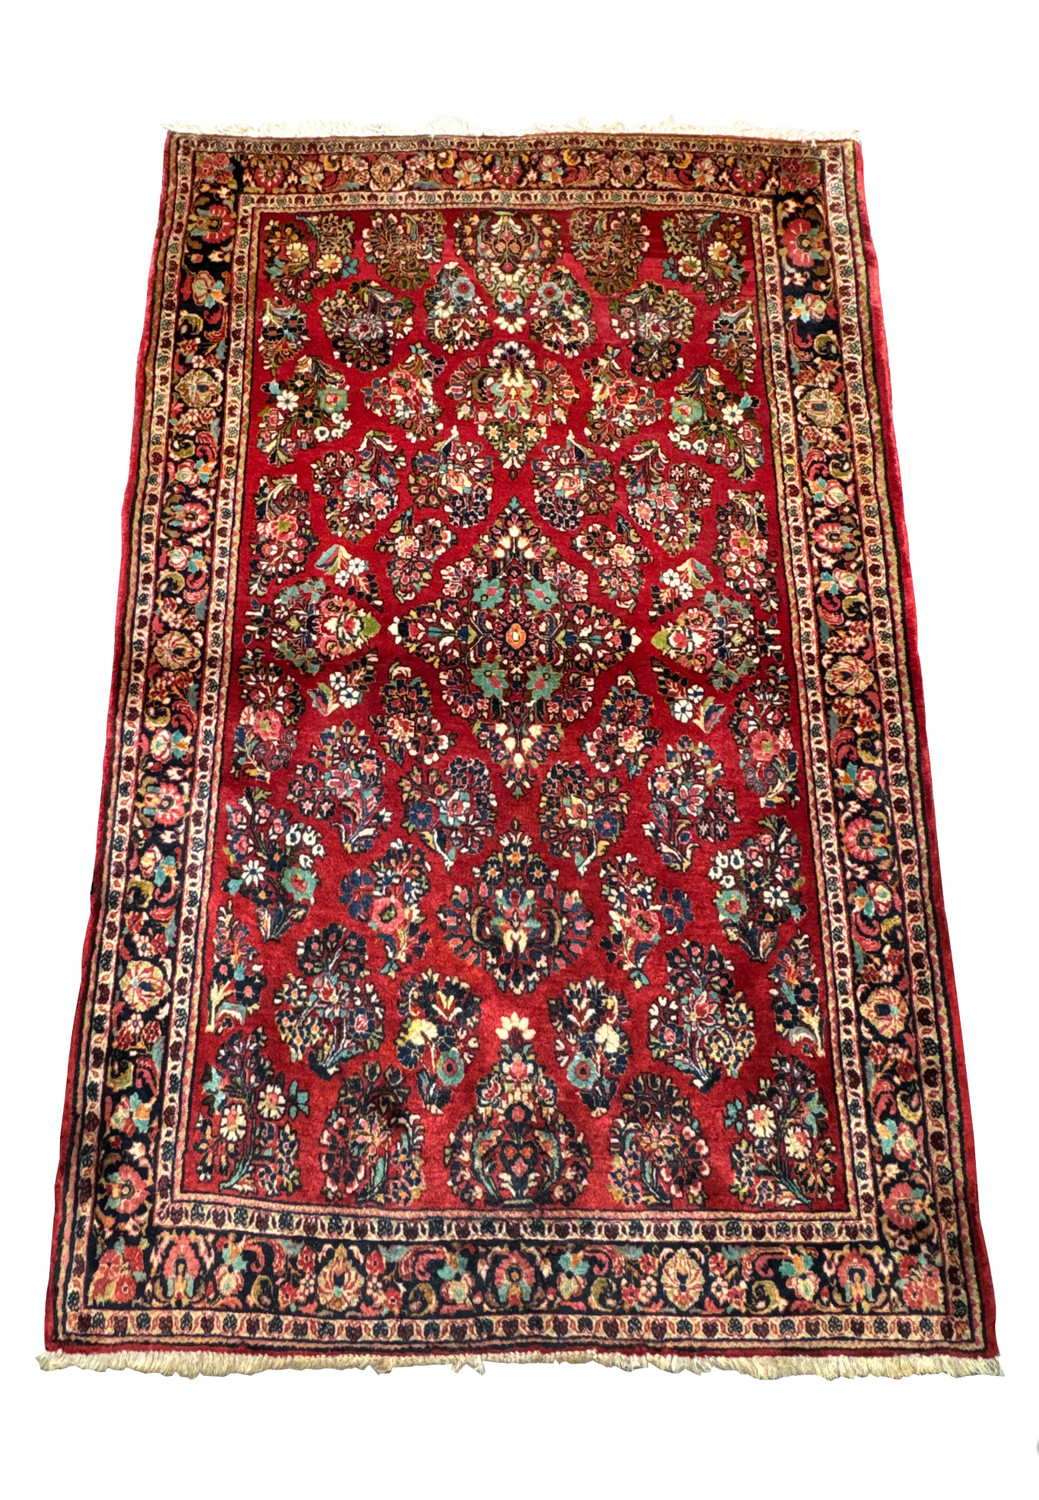 Overhead view of a 4' x 6'3 Persian Sarough rug featuring a central medallion and floral motifs on a red background with a detailed border.